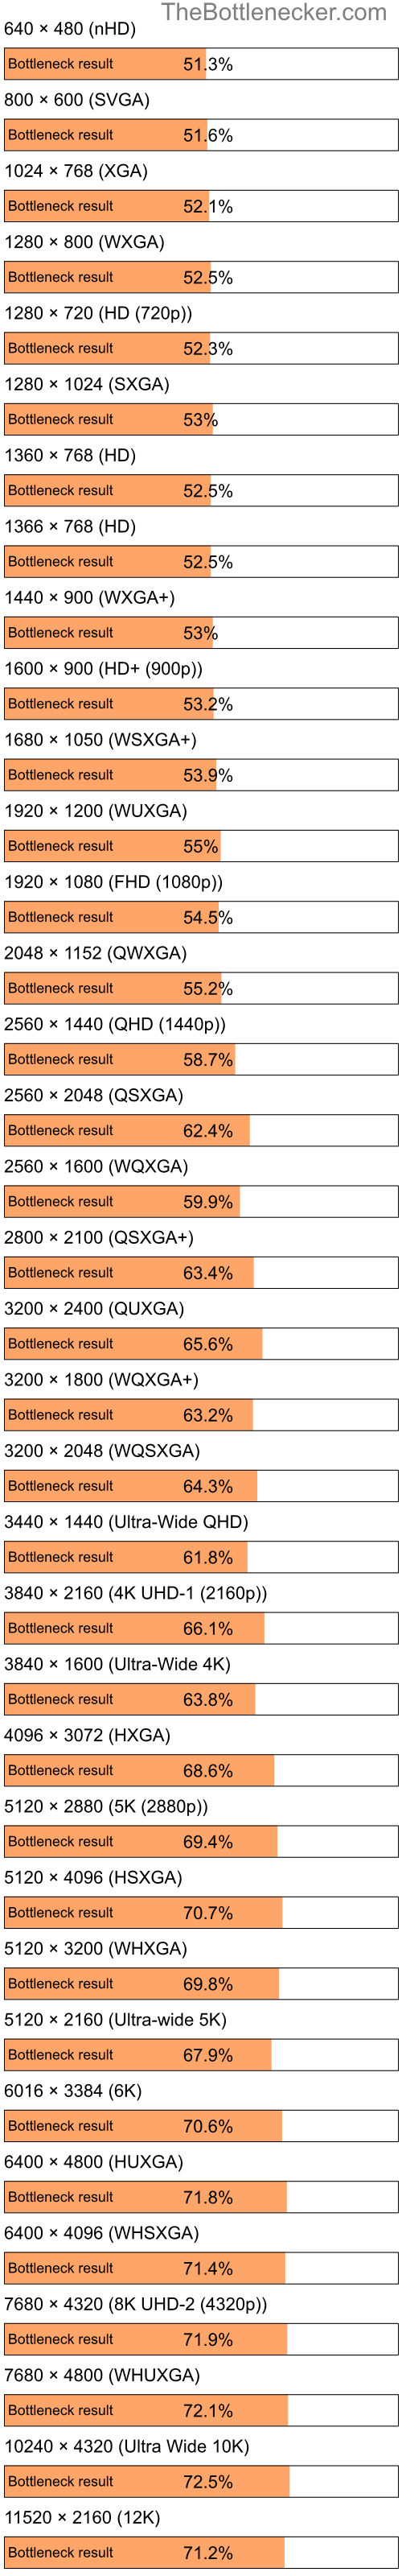 Bottleneck results by resolution for Intel Atom Z520 and NVIDIA Quadro FX 4400 in Processor Intense Tasks